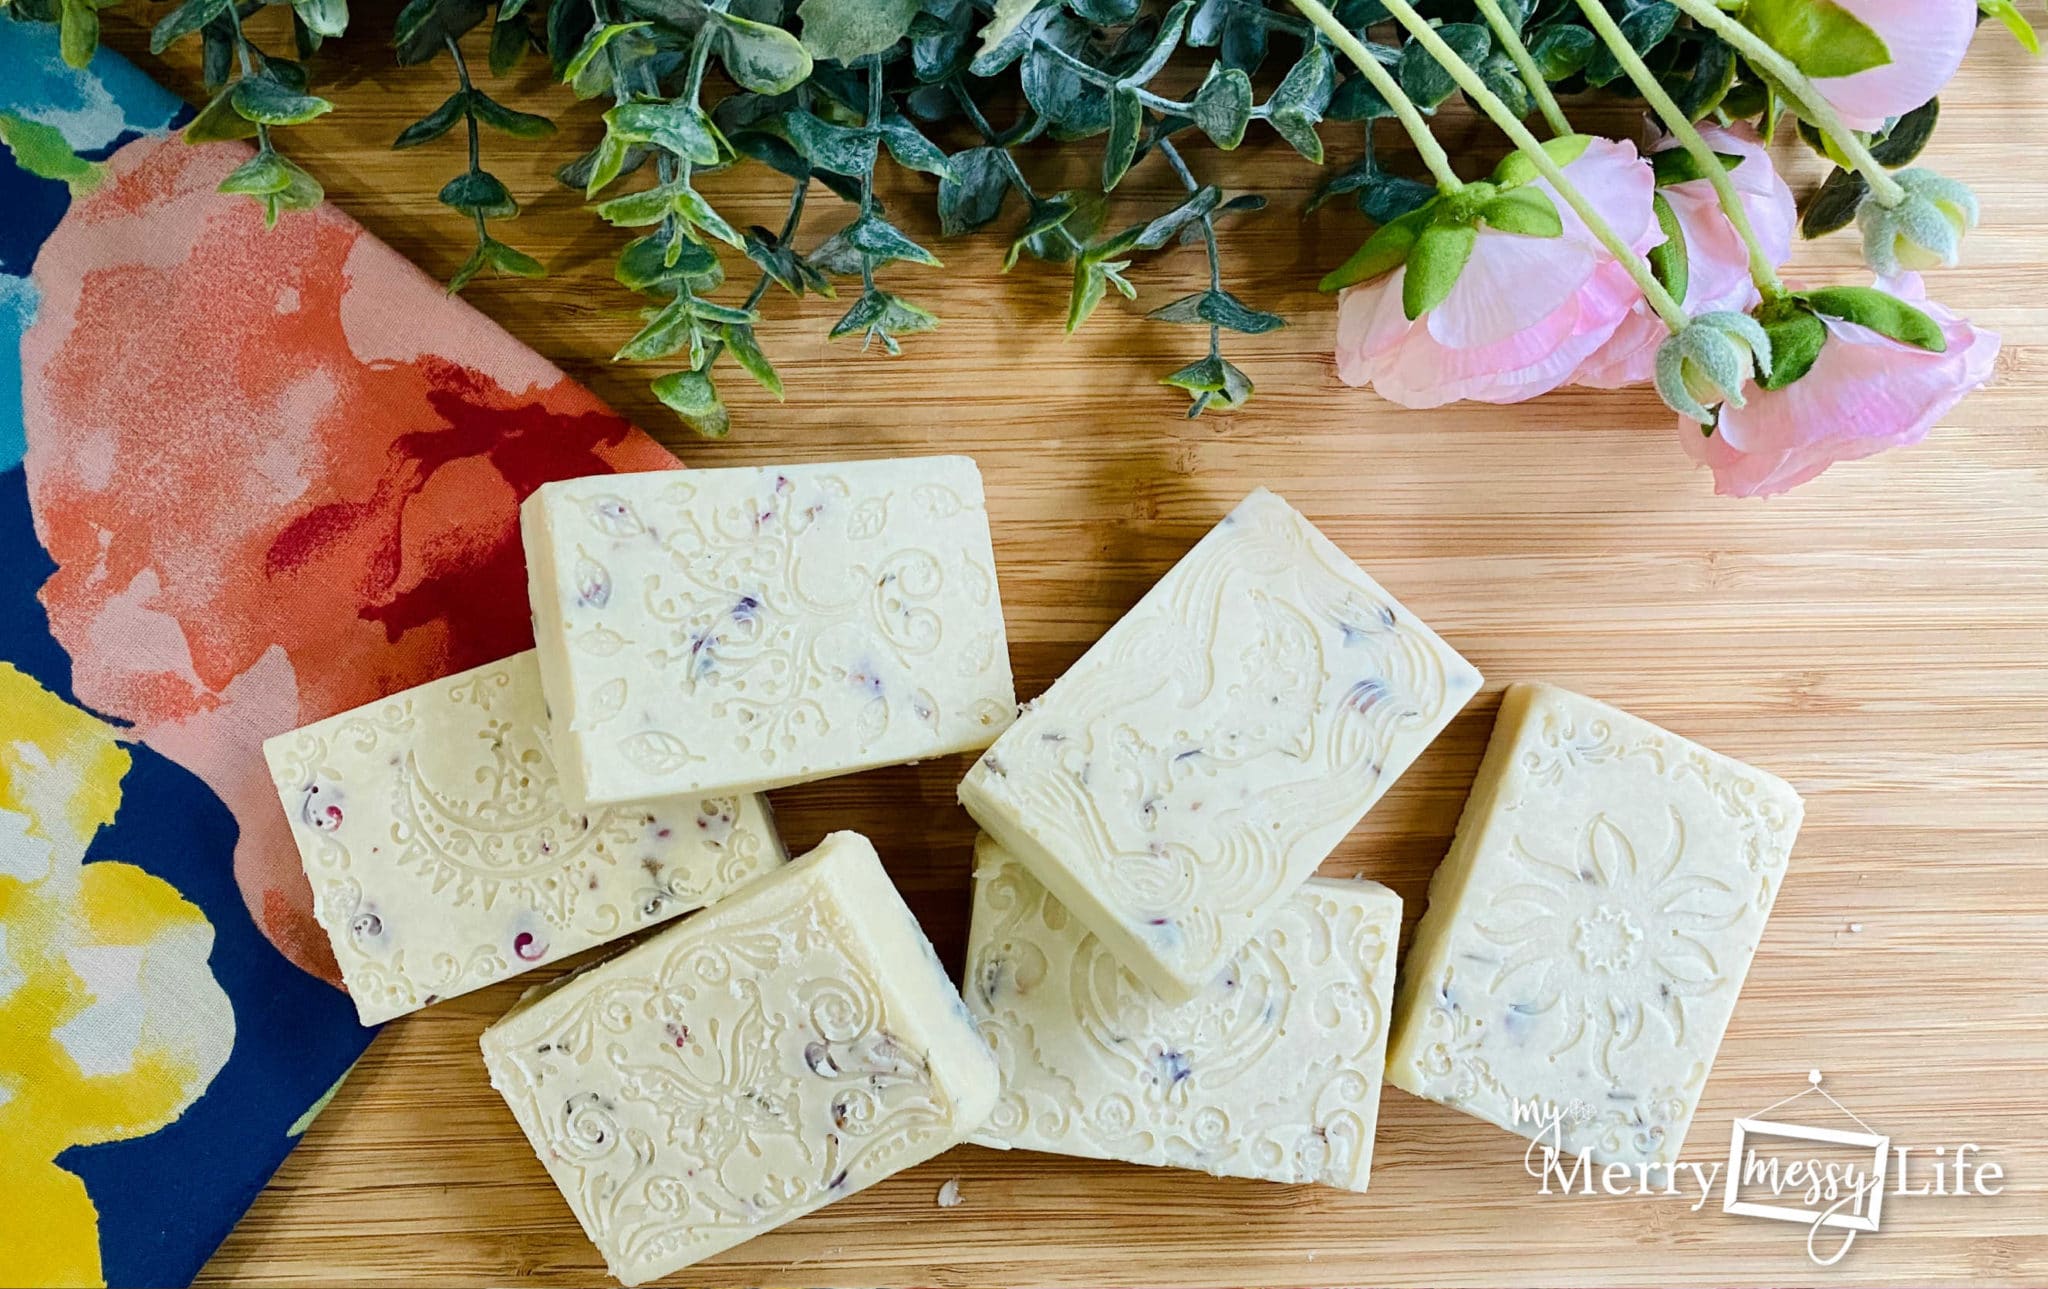 DIY Natural Lotion Bars using Shea Butter, Coconut Oil, Beeswax and essential oils for a super hydrating, luxurious bar that's healthy for your skin.